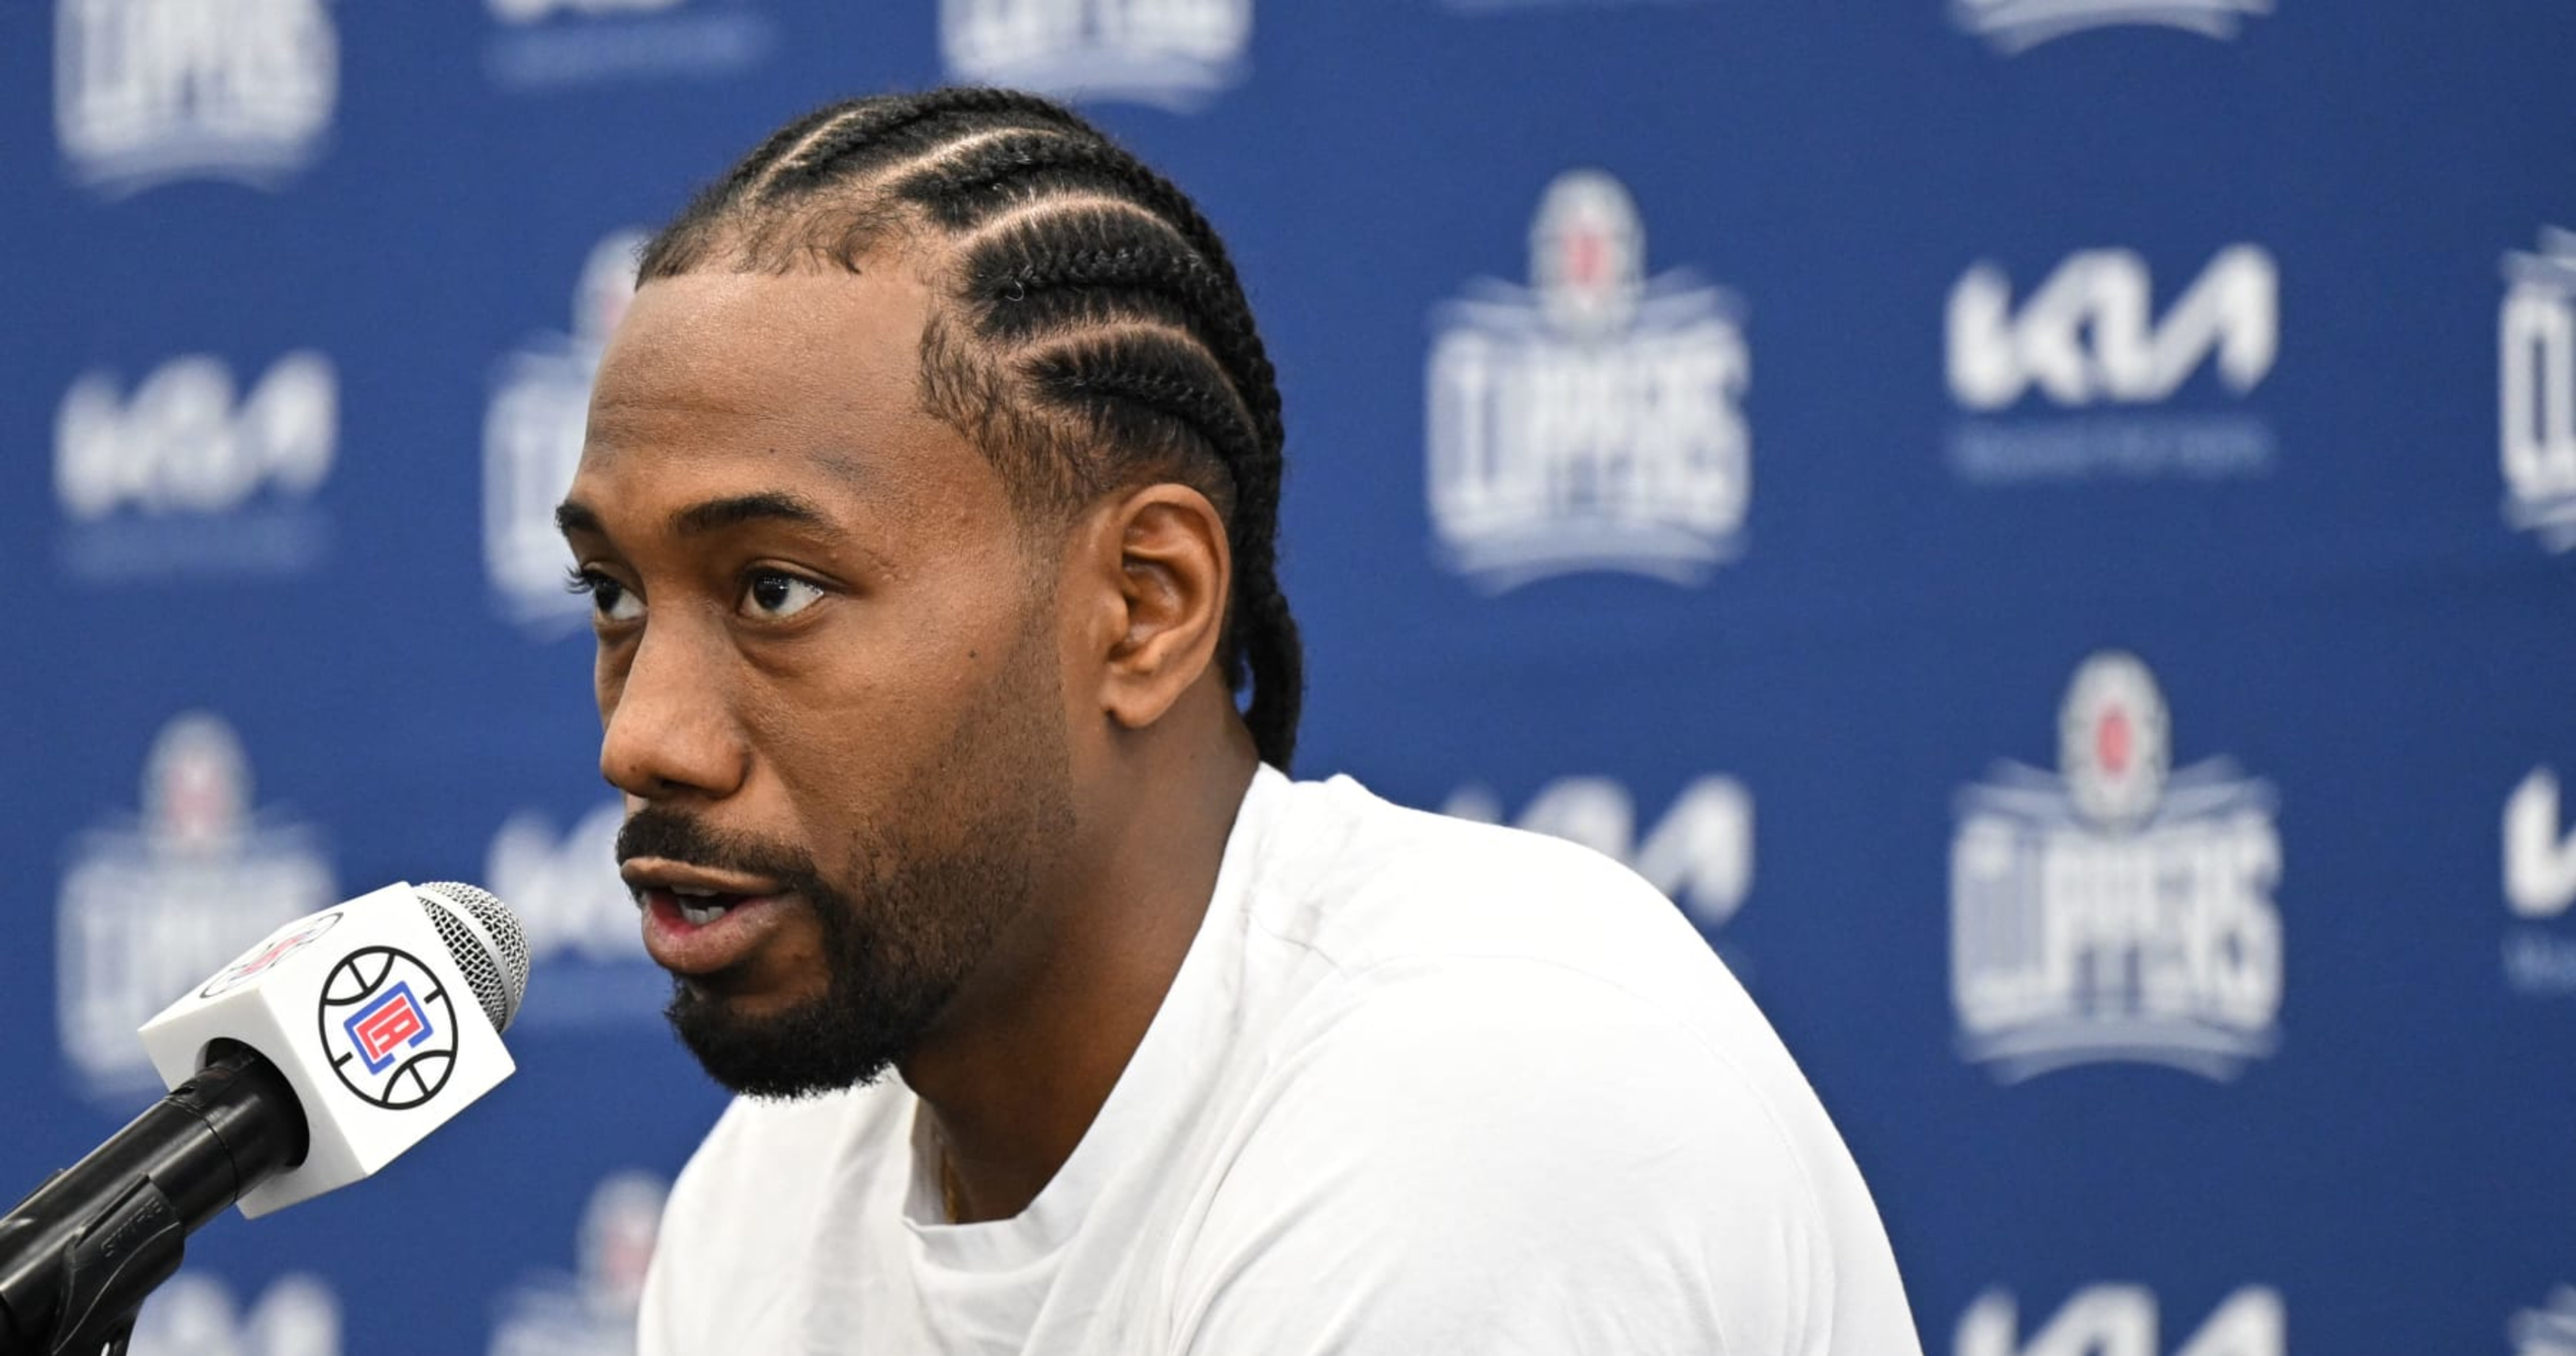 Kawhi Leonard injury update: Clippers star sidelined with leg